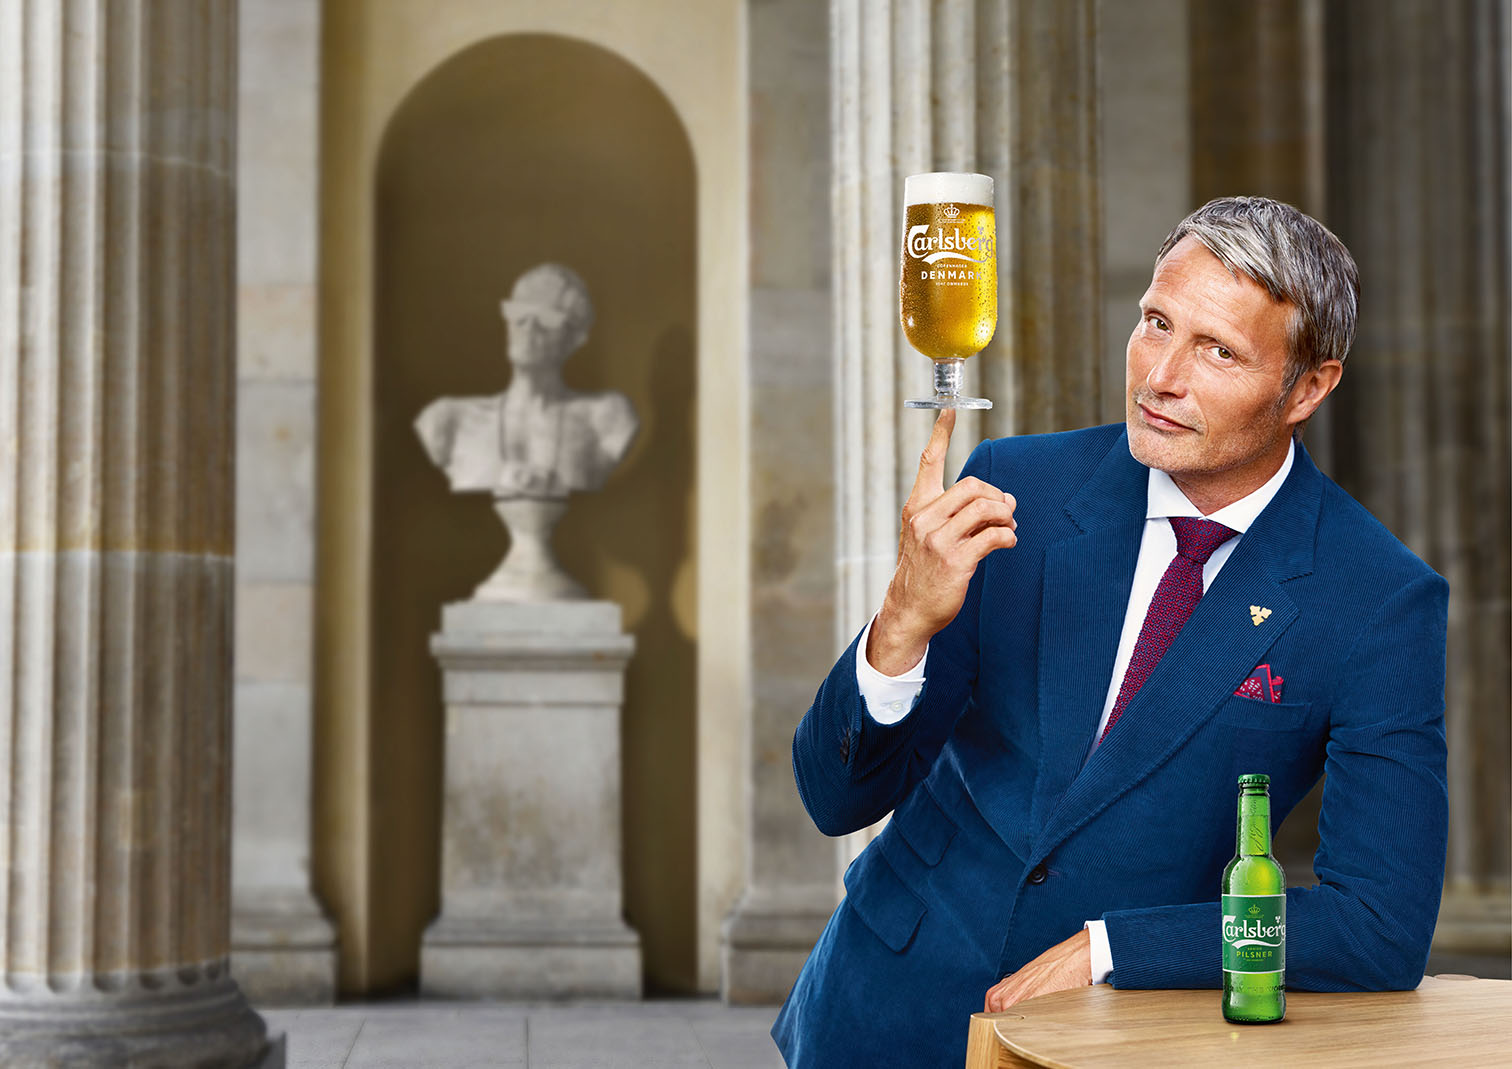 Carlsberg launches new global campaign